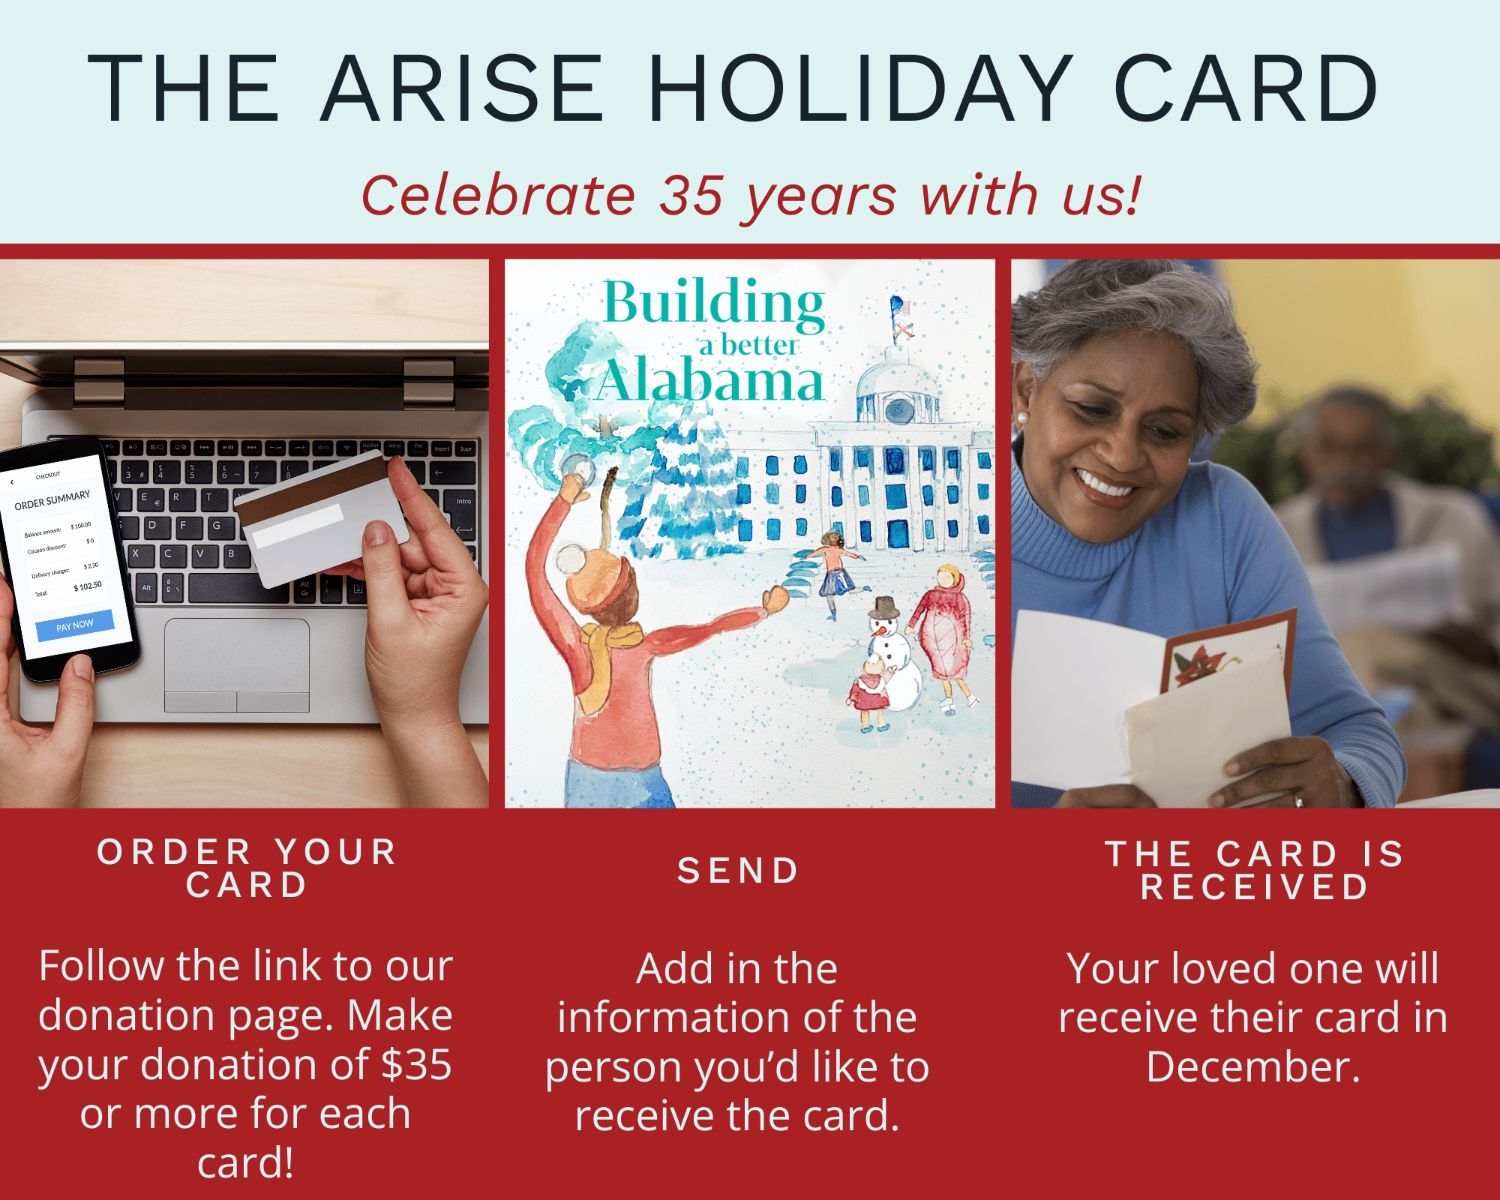 The Arise holiday card, celebrate 35 years with usThree panels of pictures show the hands of someone holding a phone and a credit card in front of a laptop. The text below says: order your card, Follow the link to our donation page. Make your donation of $35 or more for each card!In the center is a painted scene in front of the Alabama state capitol.The text below reads: Send, Add in the information of the person you’d like to receive the card. The third panel shows an older Black woman reading a greeting card. The text below reads: the card is received, Your loved one will receive their card in December.